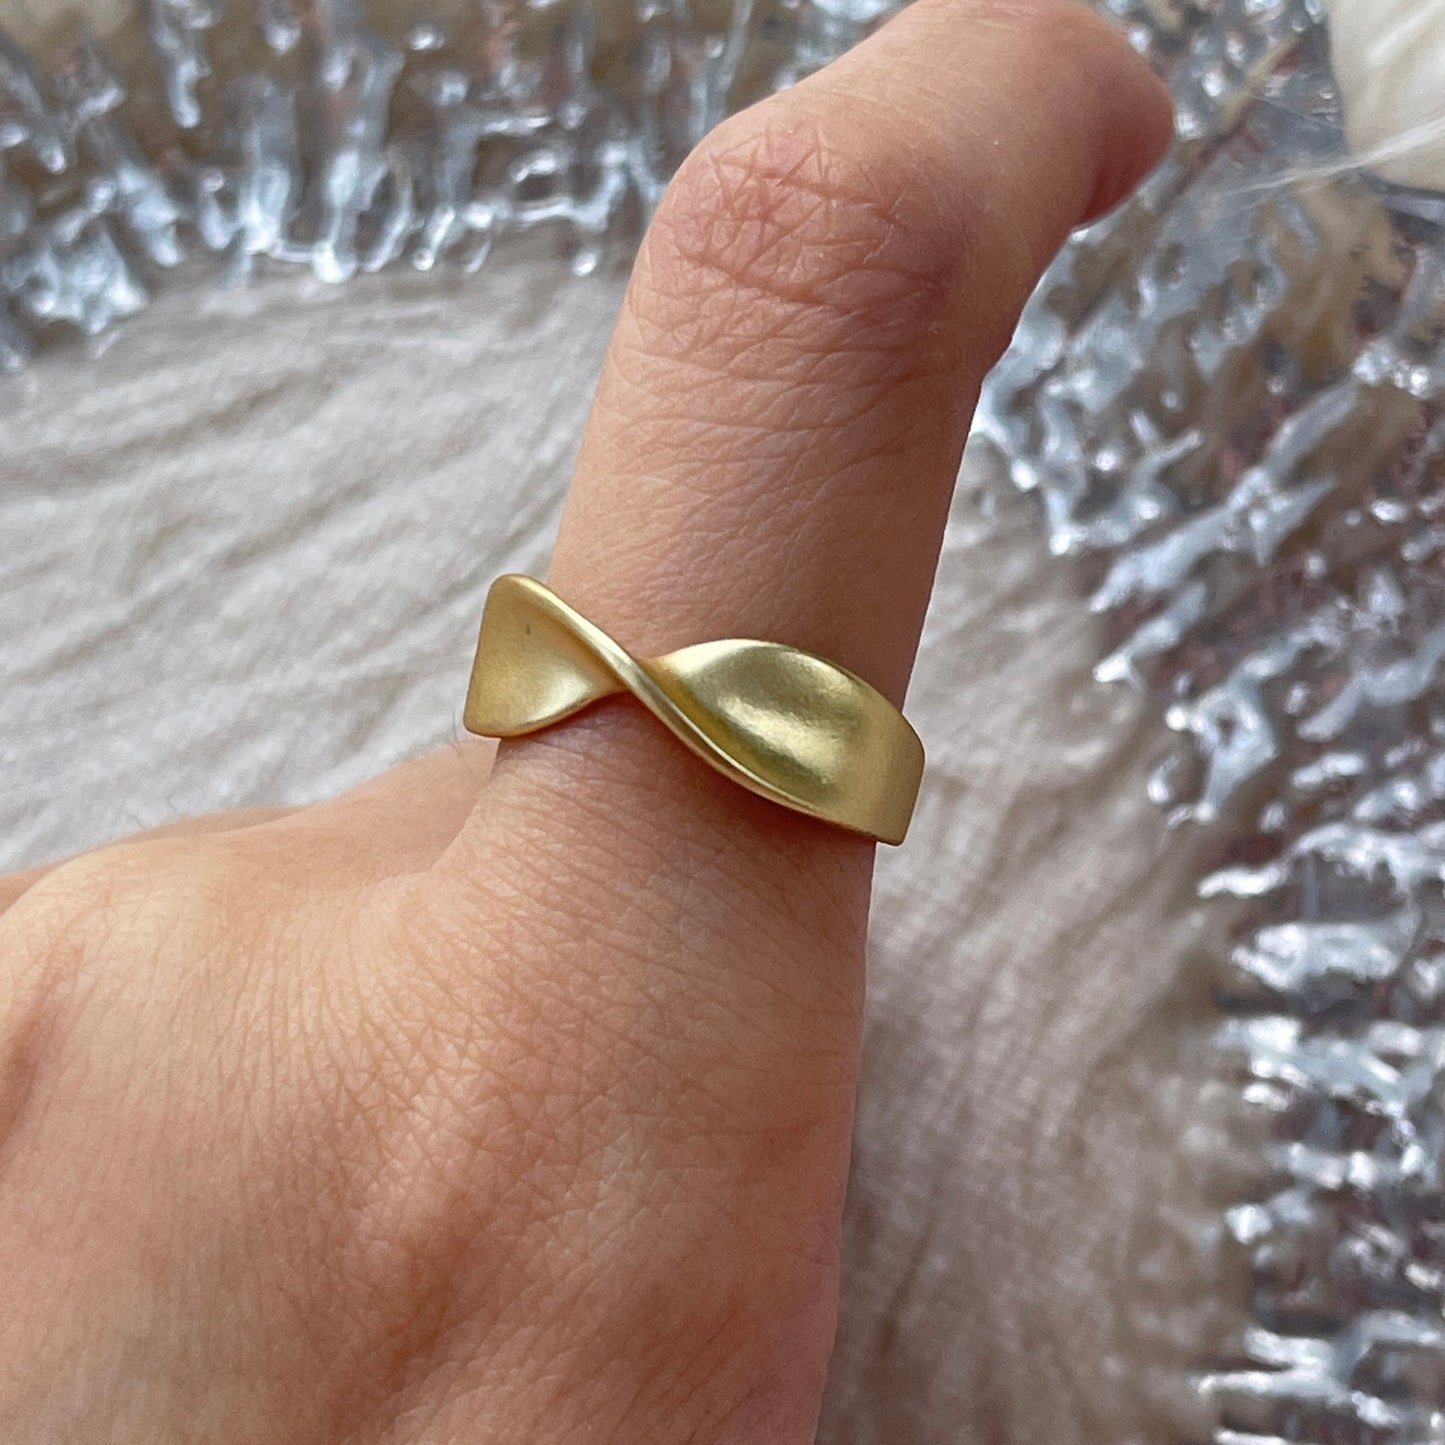 Thick Mobius ring, Infinity loop ring, Engagement promise ring, Dainty infinity ring, Gold mobius ring, Chunky rings, Wide band ring, y2k